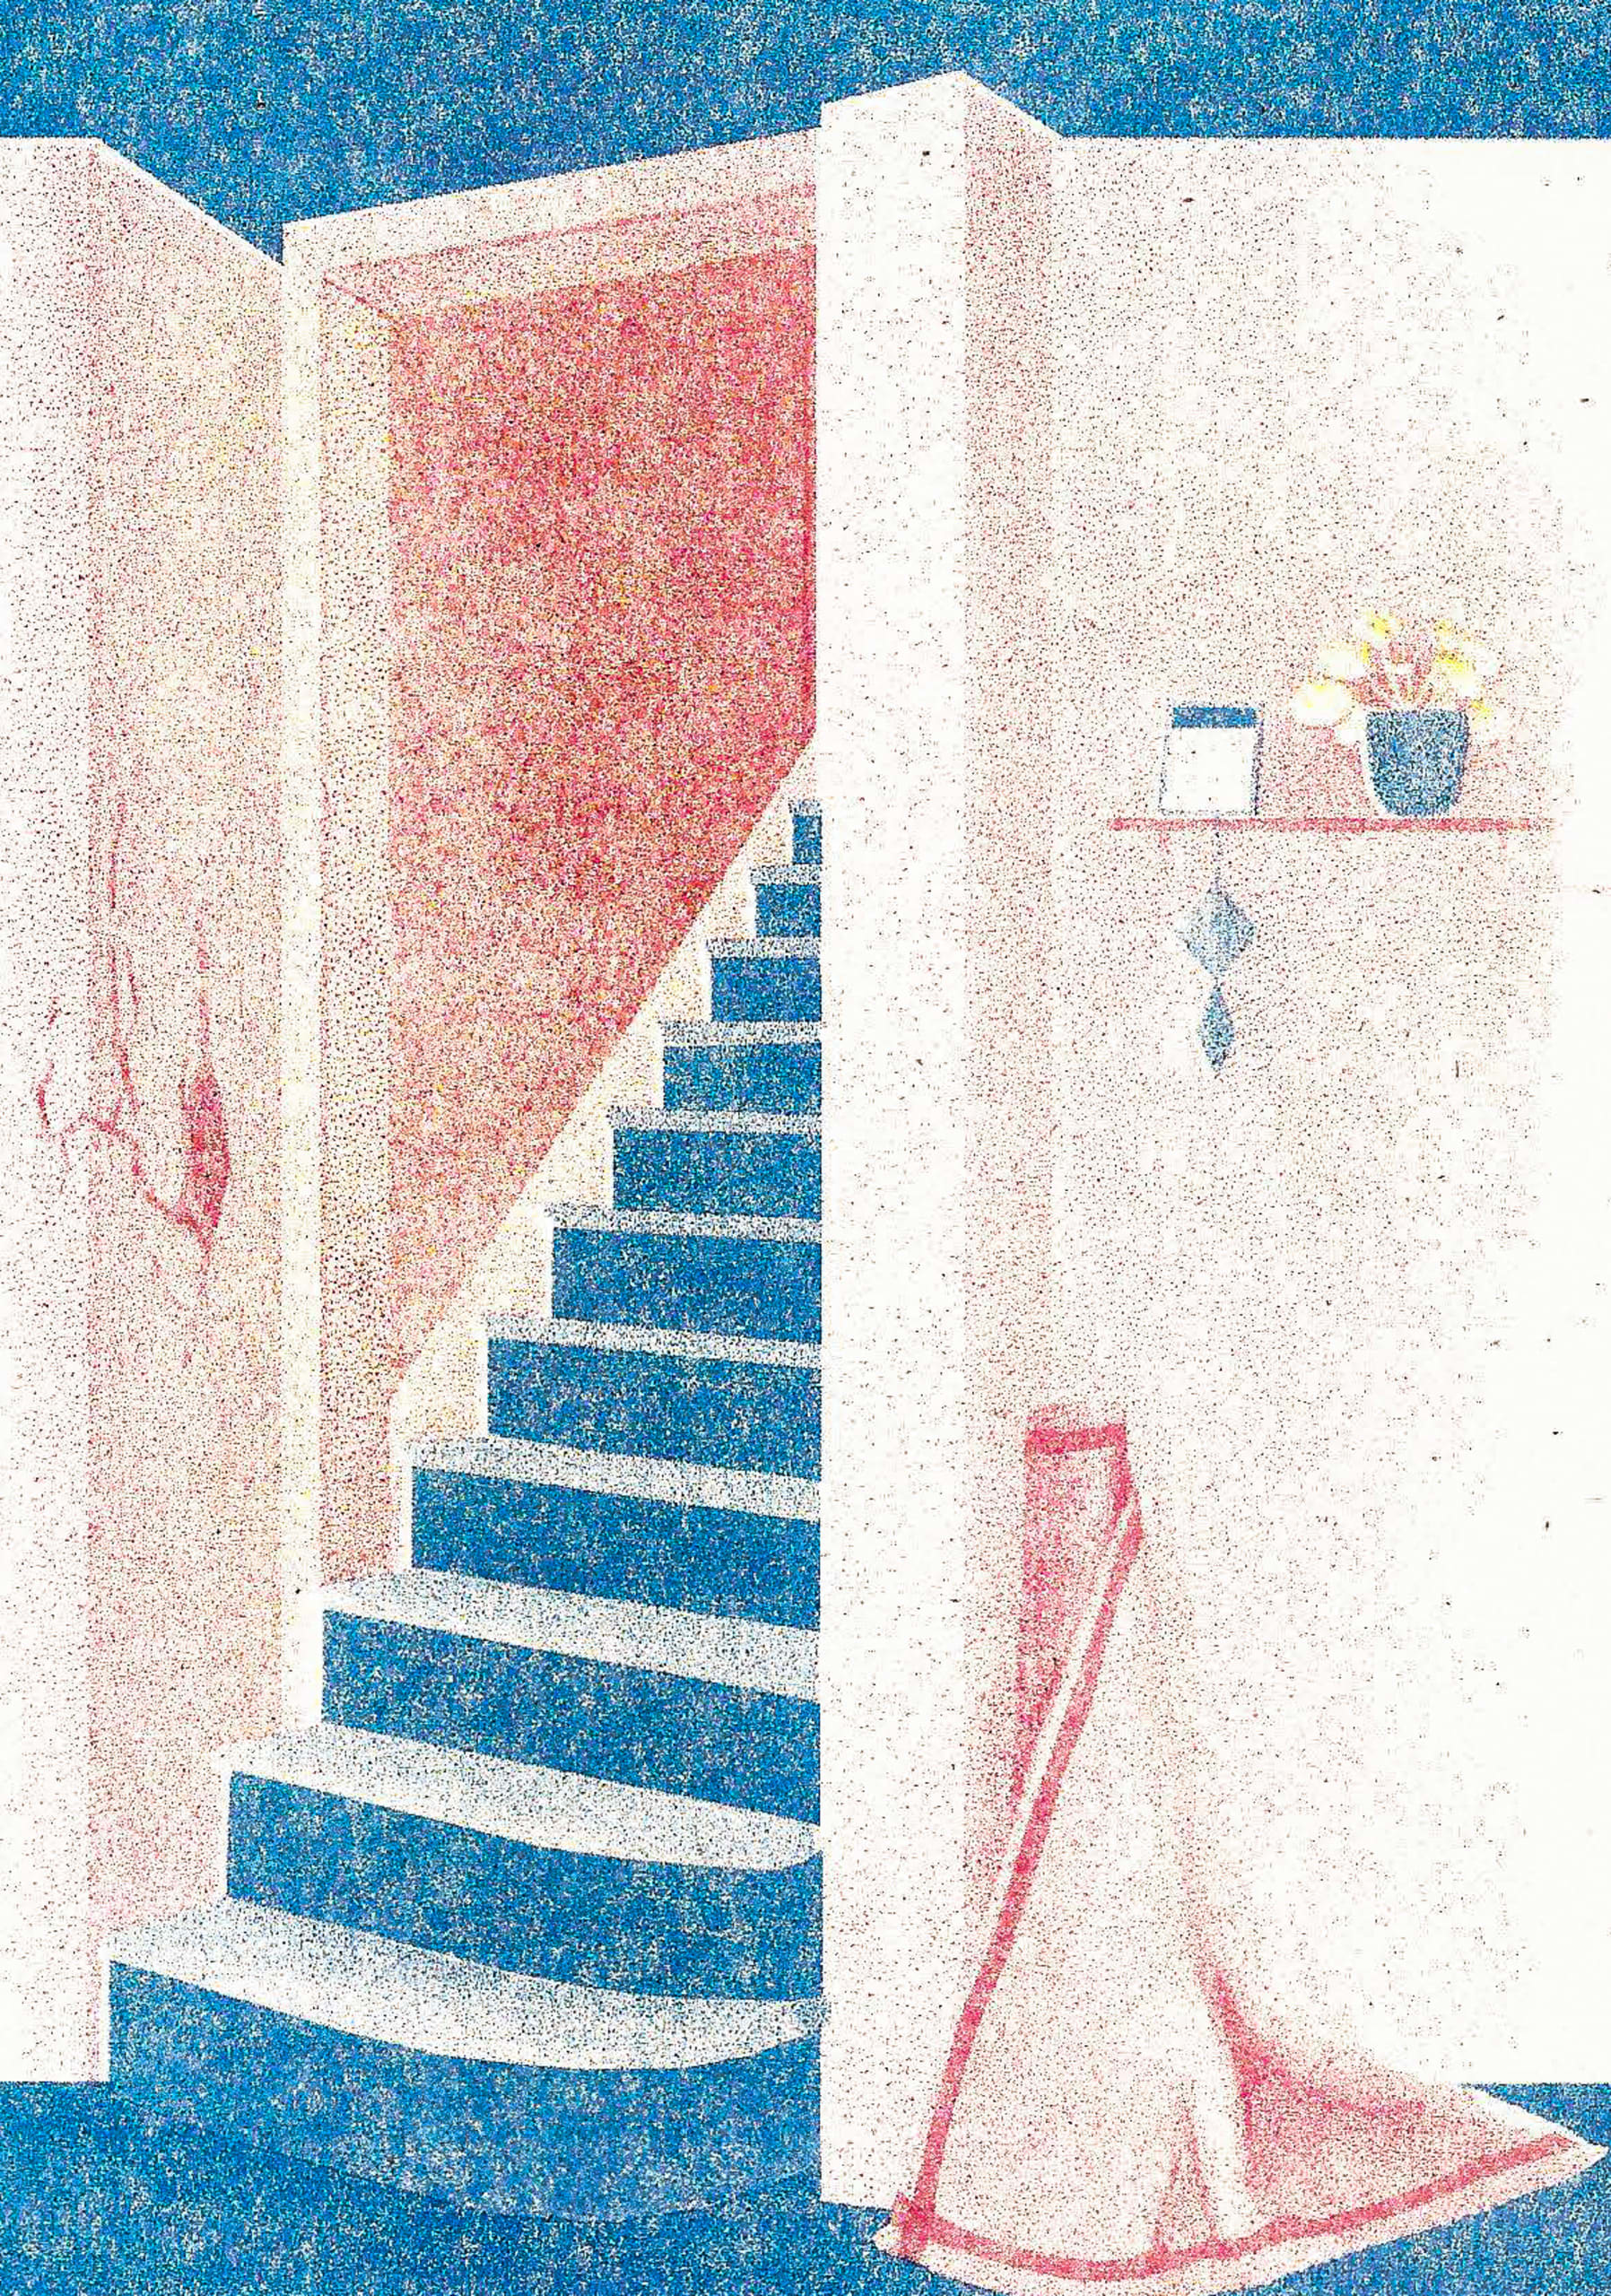 A myriorama card showing a staircase with a rolled up carpet leaning against it. The wall has a crack in it. 